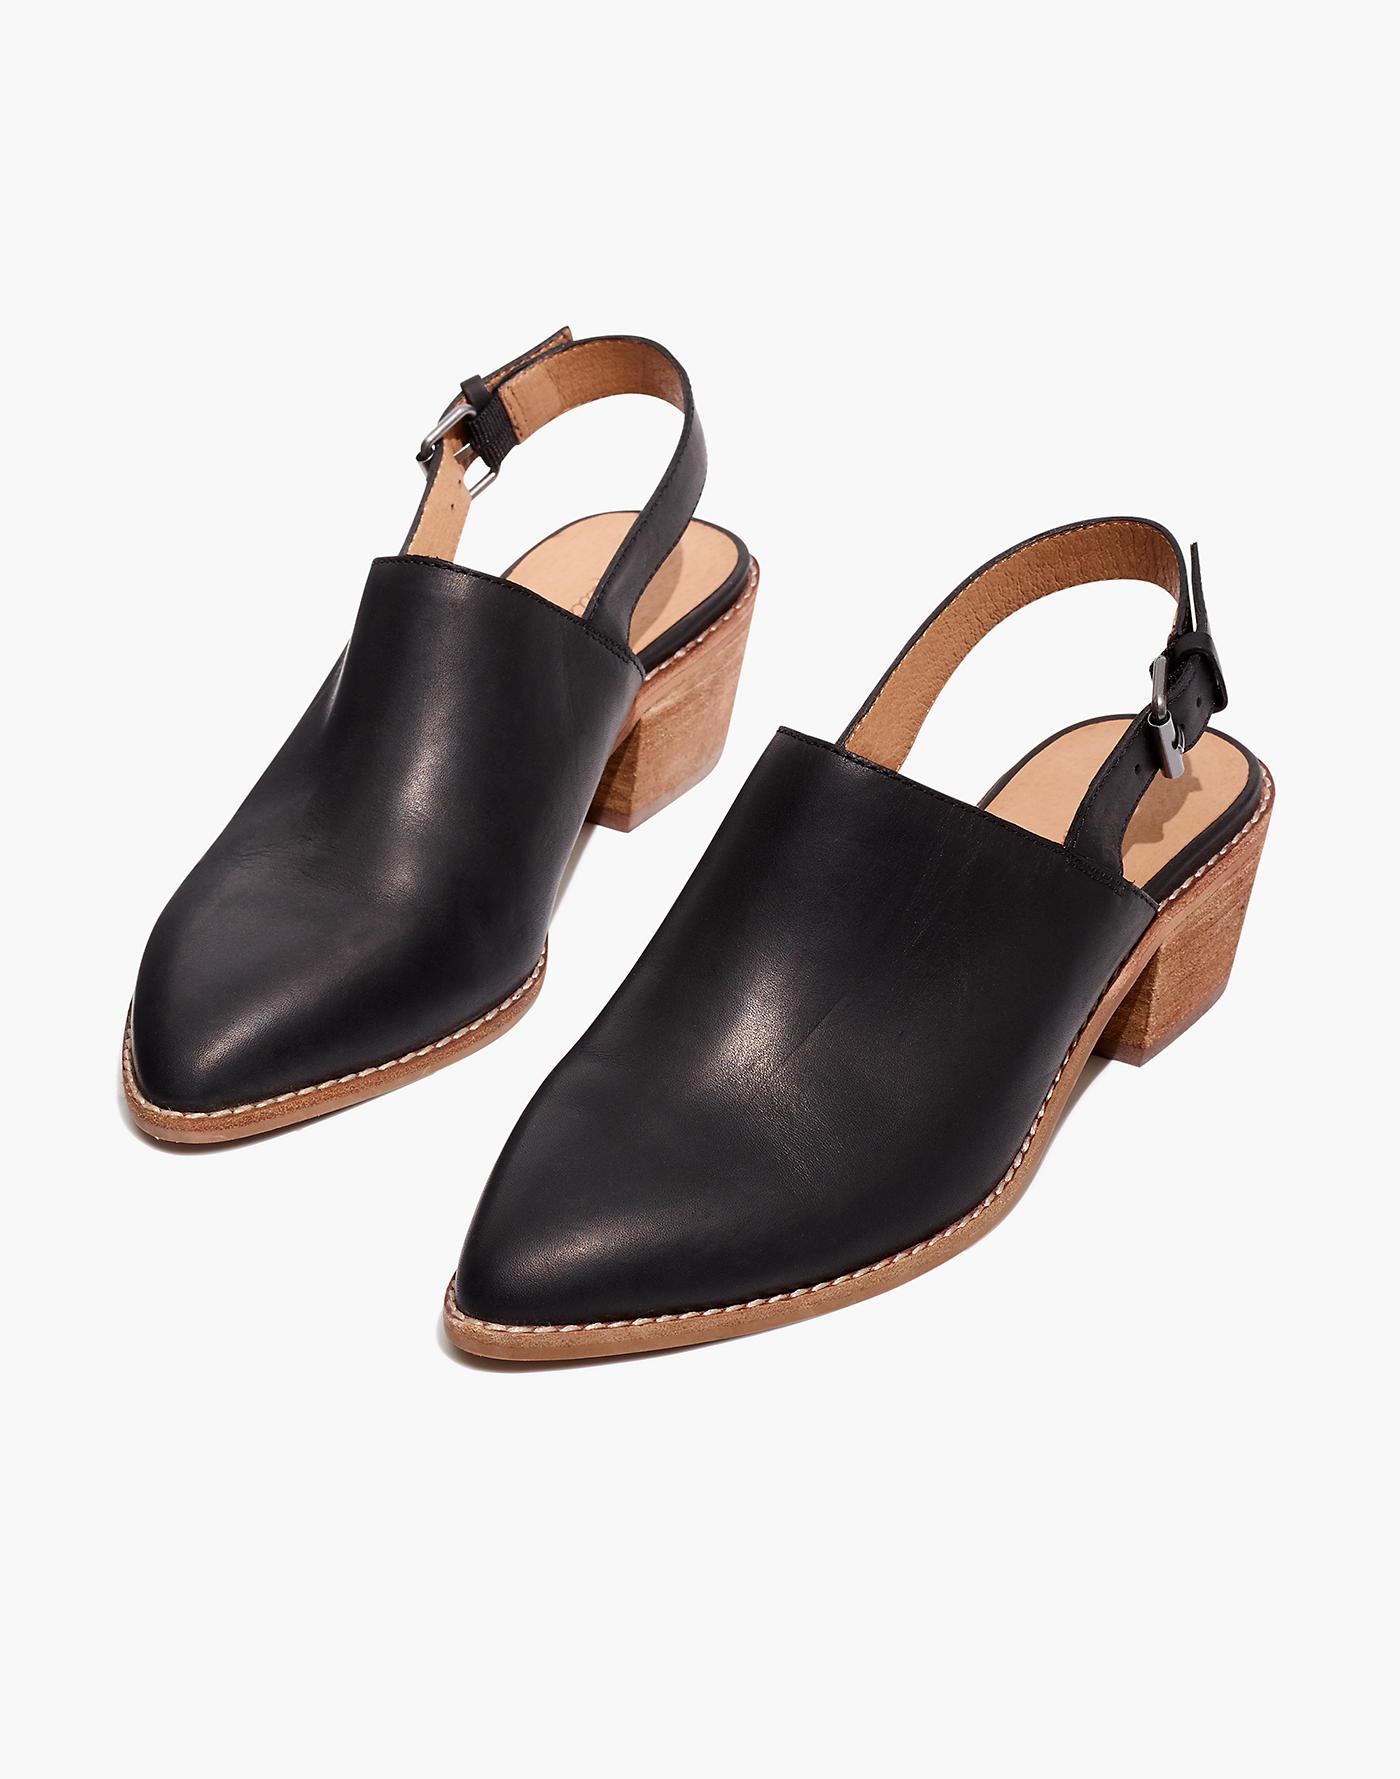 Madewell Leather The Jess Slingback Mule in Black - Lyst